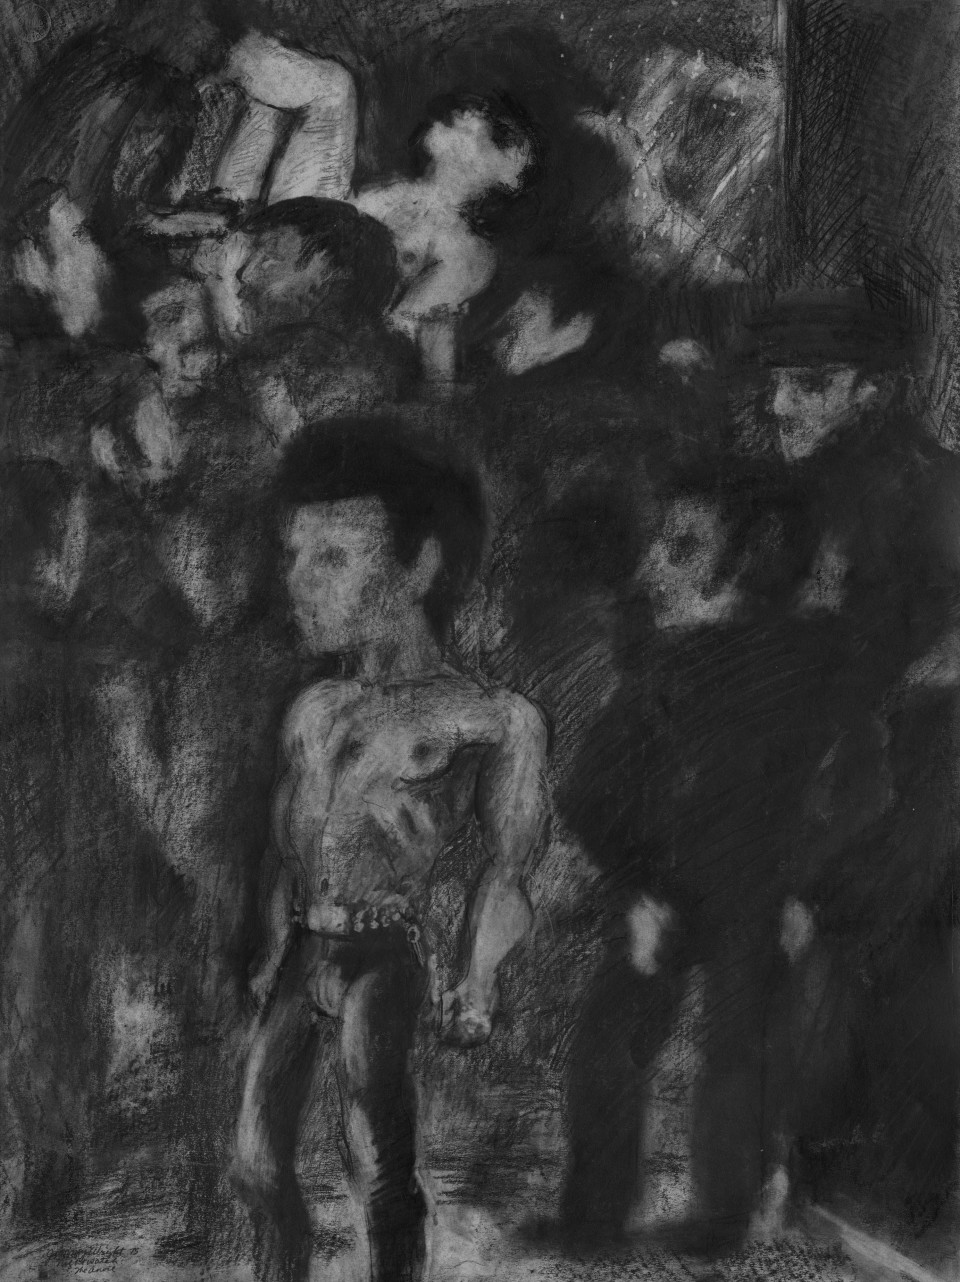 Image: Jimmy Wright  Nightwatch: The Anvil, 1975  graphite on paper  30 x 22 inches (76.2 x 55.9 cm)